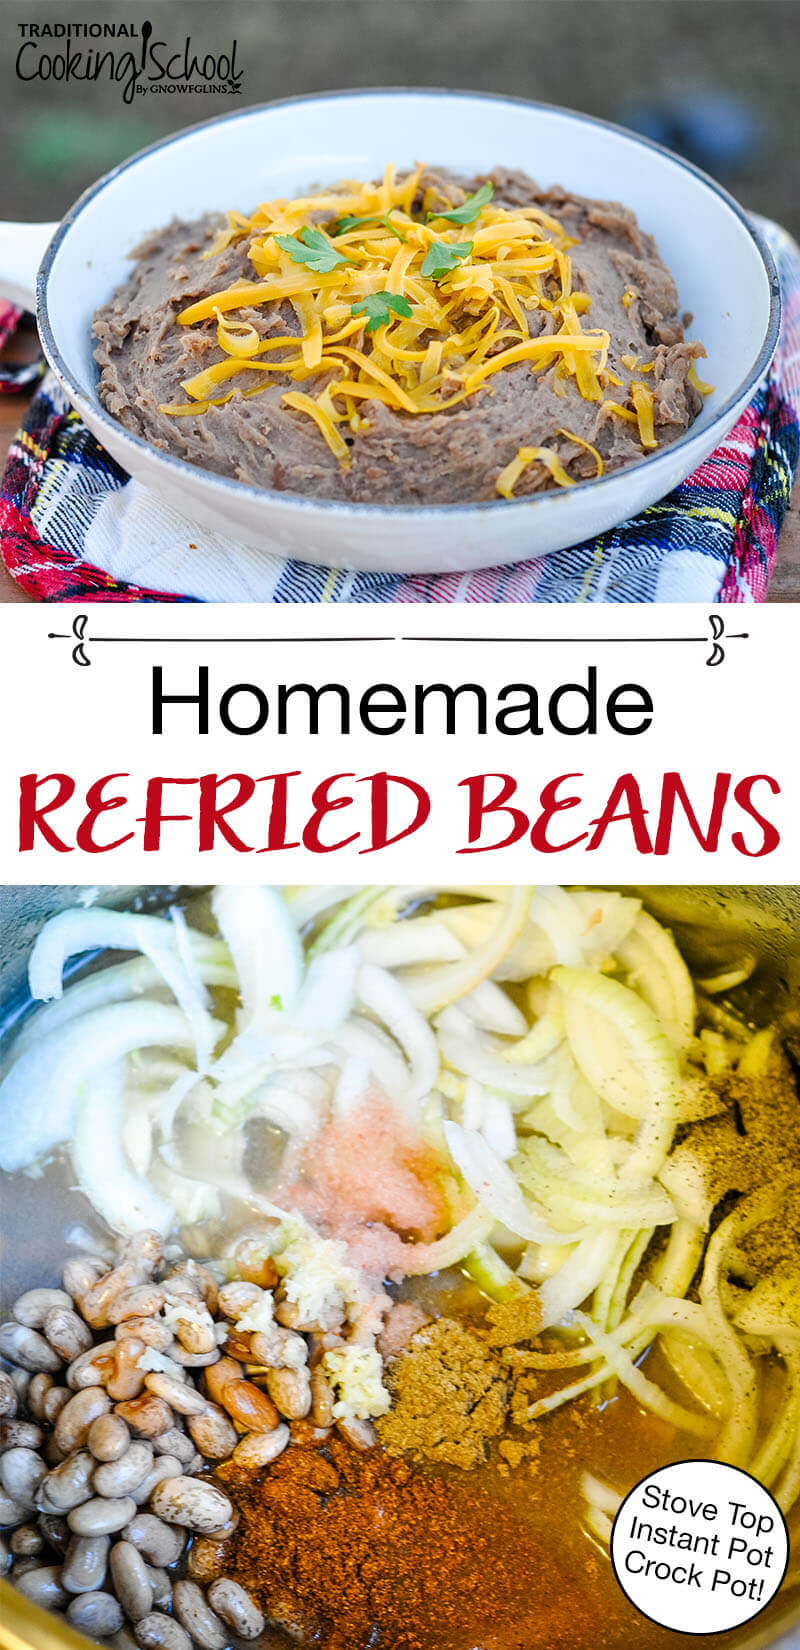 photo collage of making refried beans, with text overlay: "Homemade Refried Beans (Stove Top, Instant Pot, Crock Pot!)"